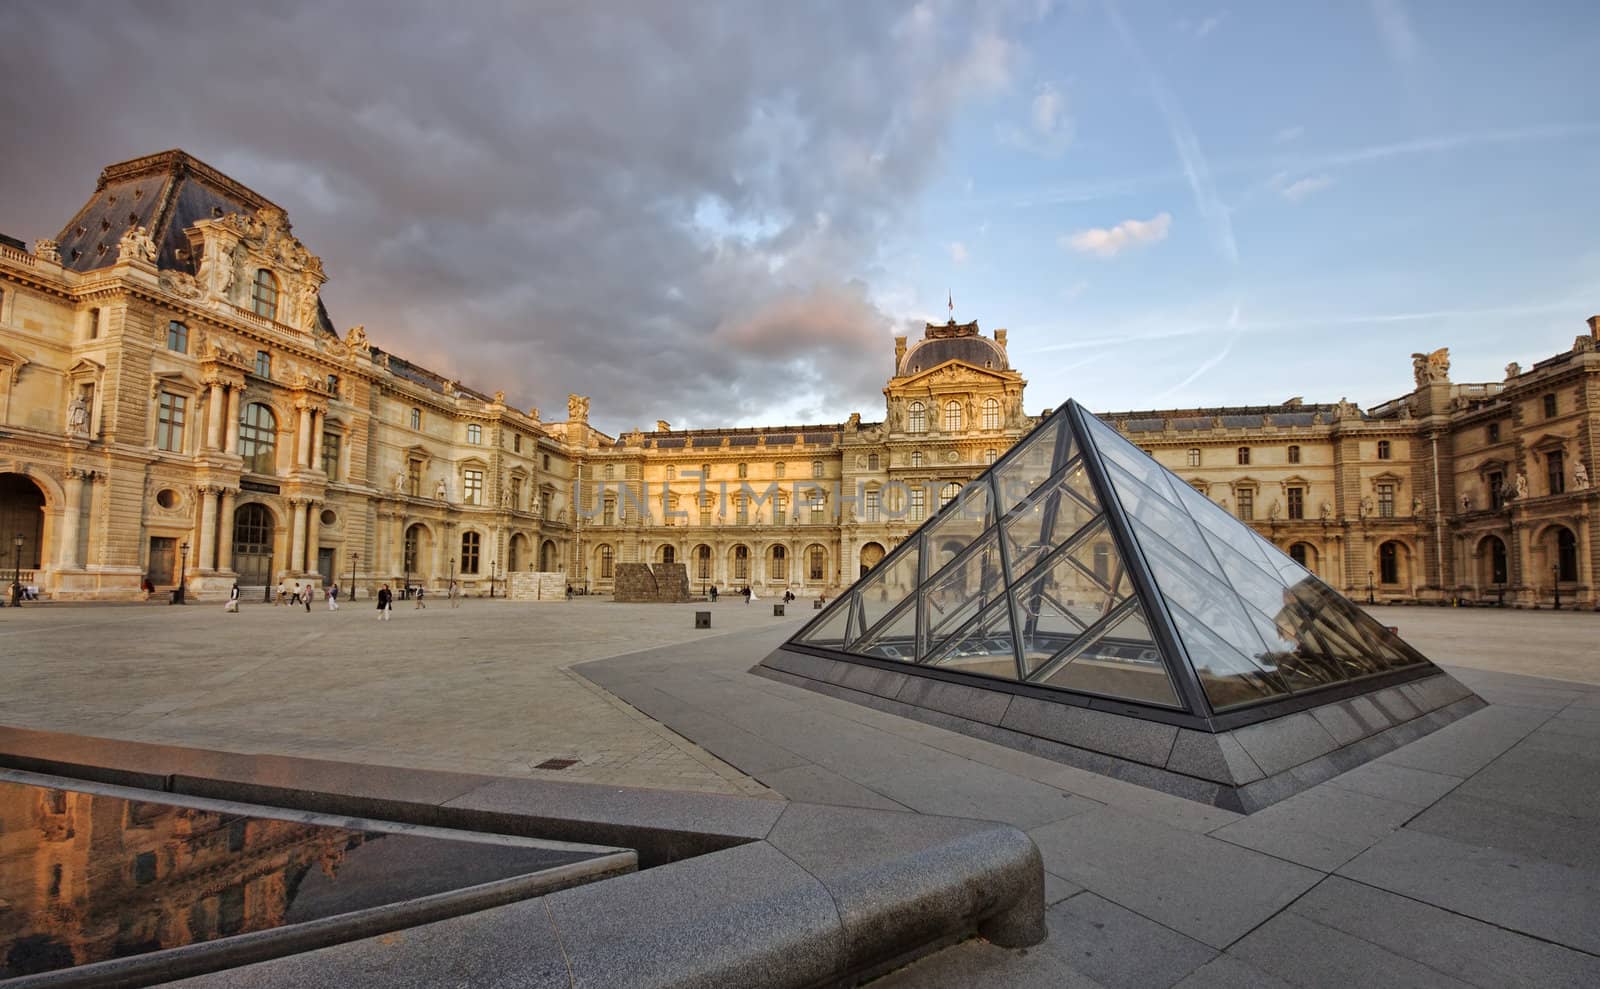 PARIS - SEPT. 22: Louvre museum building on September 22, 2011 at Louvre museum, France. It is consistently the most visited museum in the world with over 8 million annual visitors